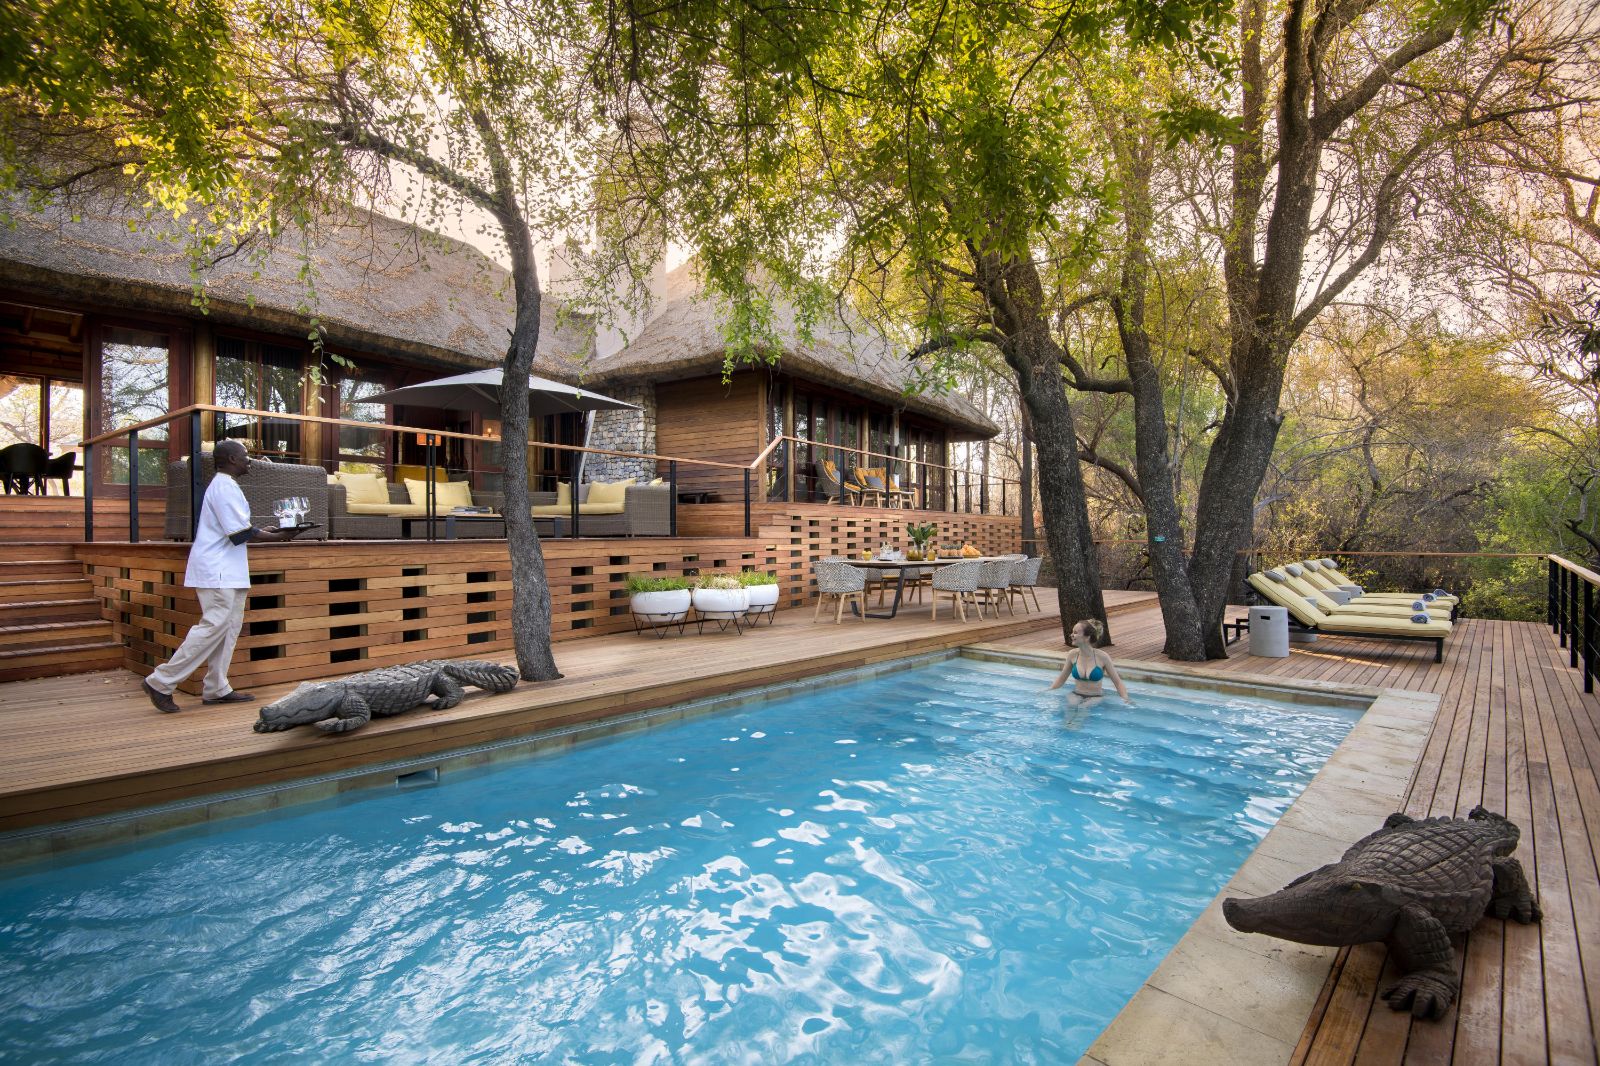 Guest enjoying a dip in the cooling pool at luxury private house Morukuru River House in the Madikwe Game Reserve in South Africa